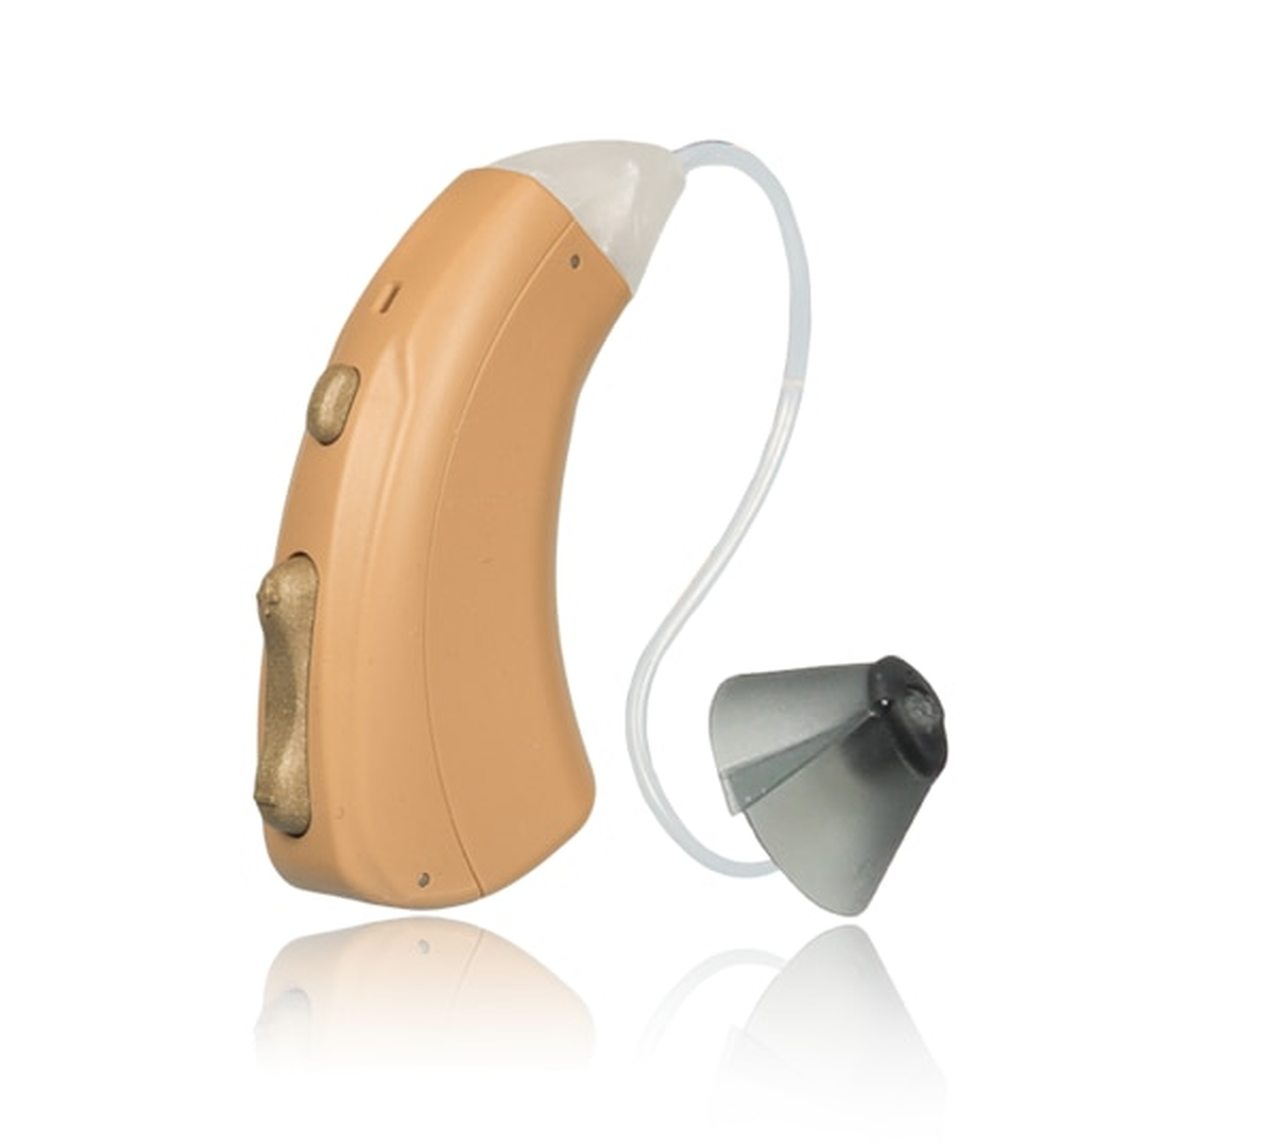 Hearing Aids & Severe Frequency Loss?